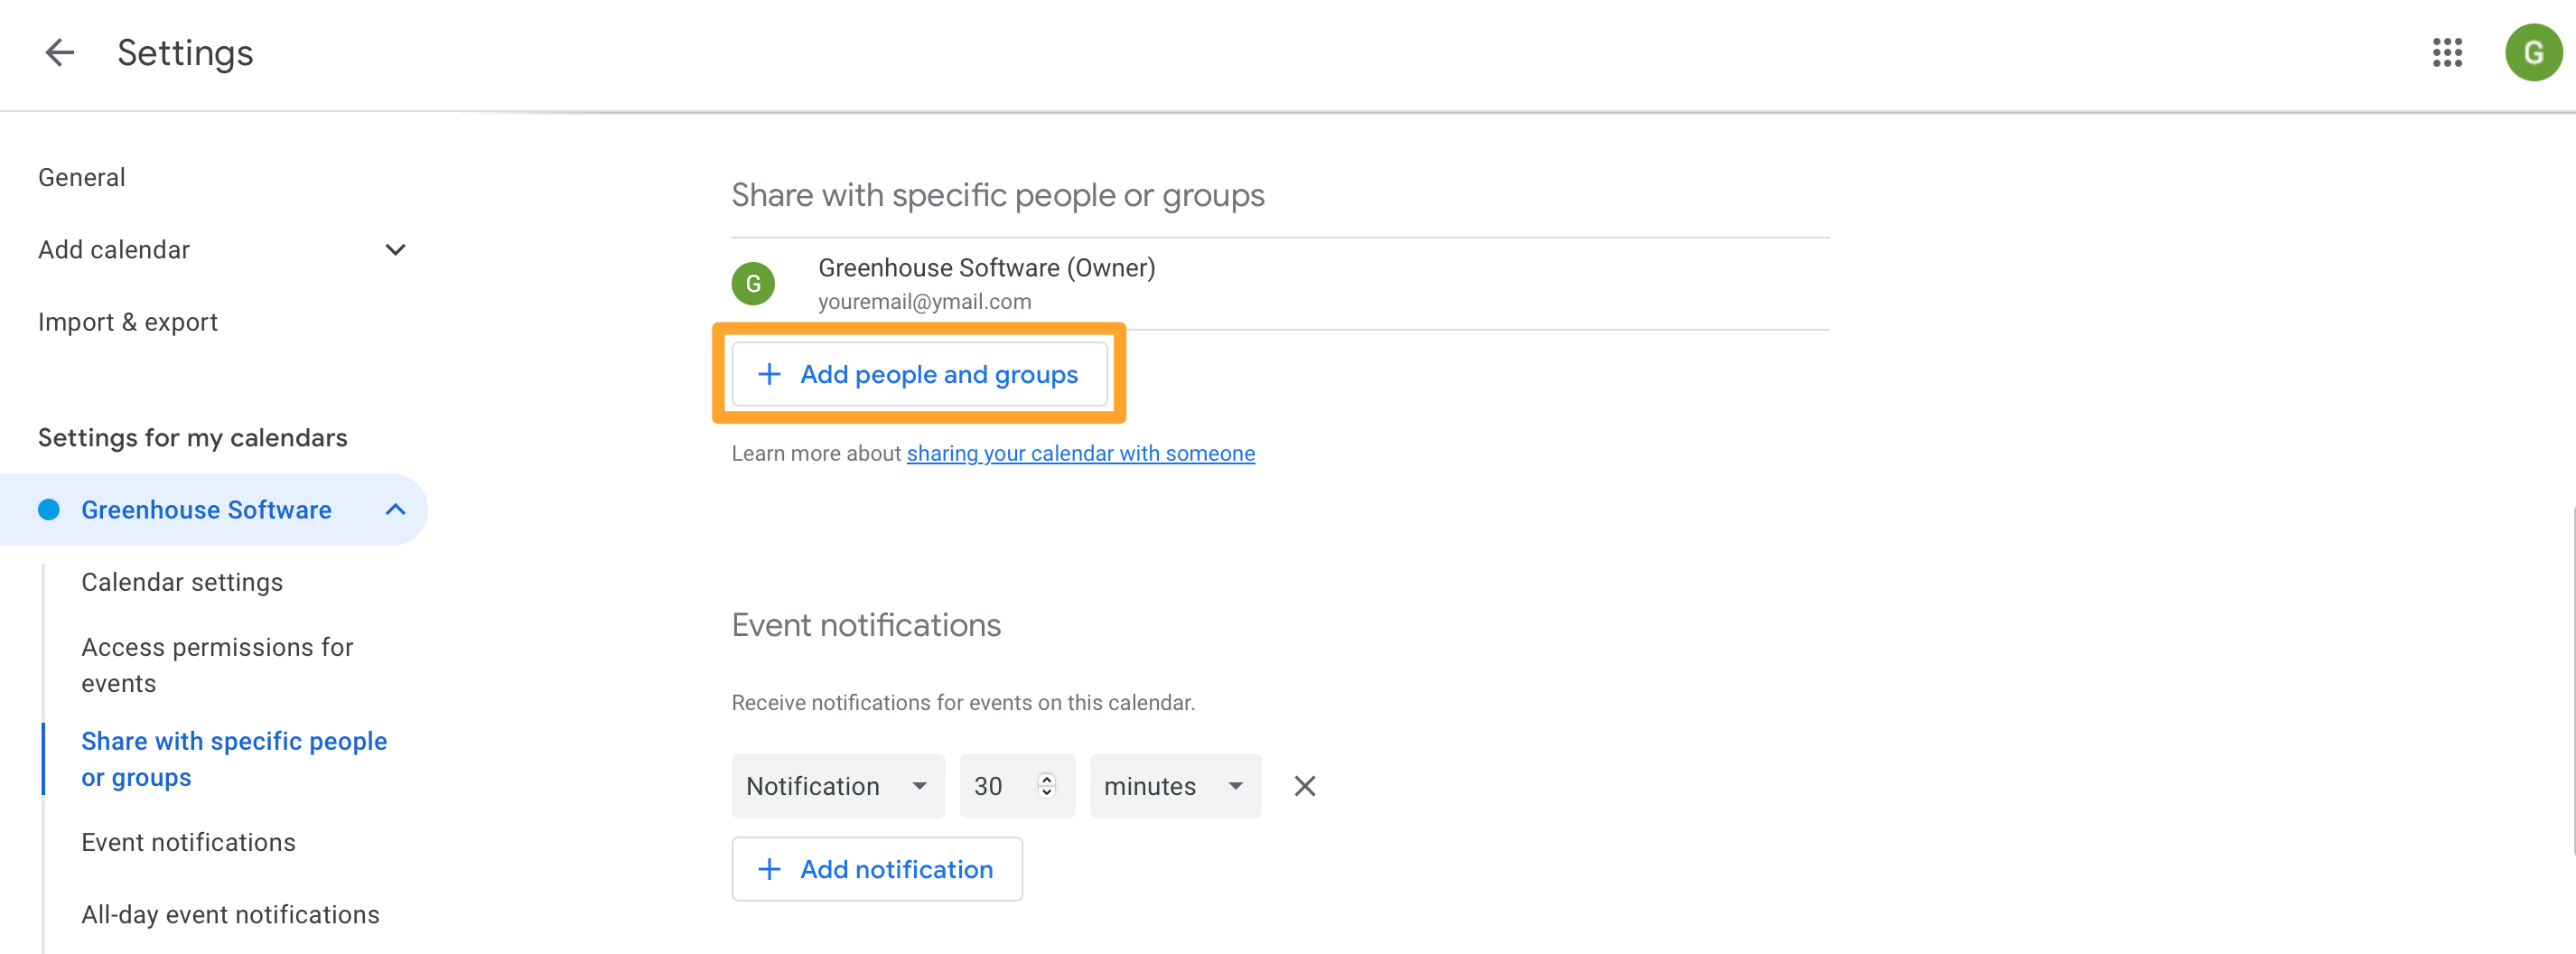 Google Calendar shows Add people and groups button highlighted in marigold